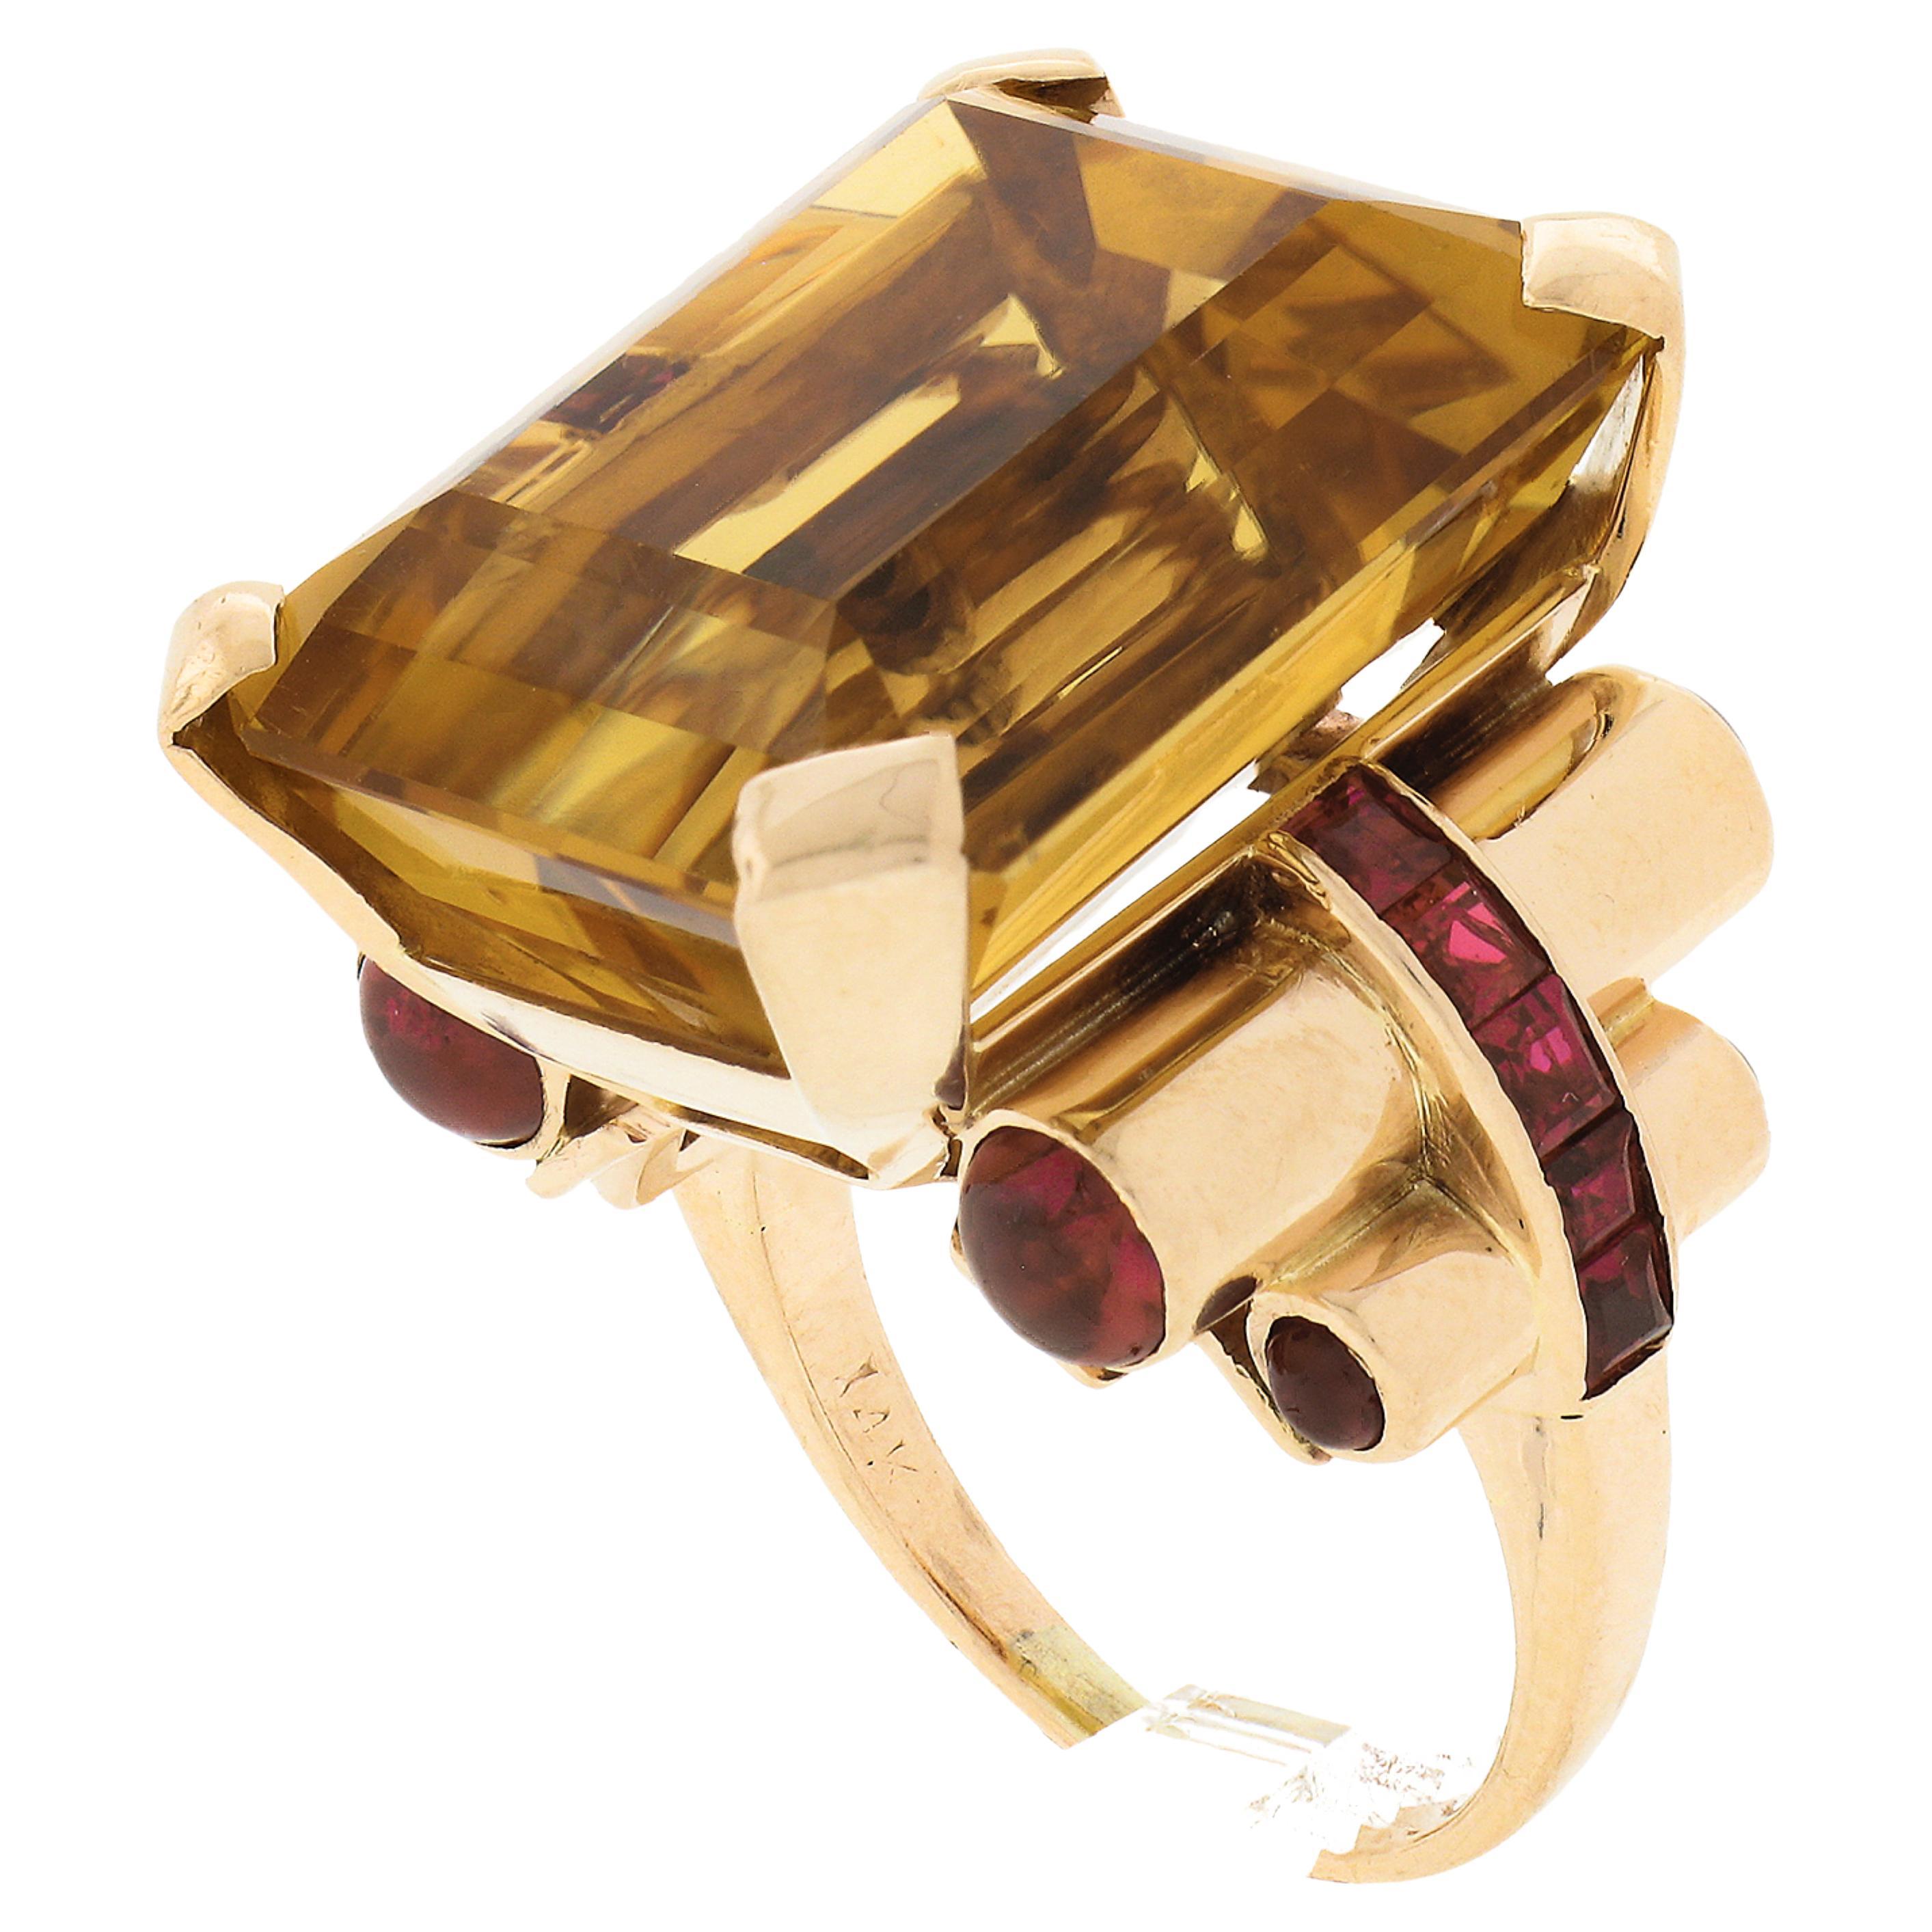 Retro 14K Gold 30.6ct Large Rectangular Citrine Solitaire & Ruby Cocktail Ring